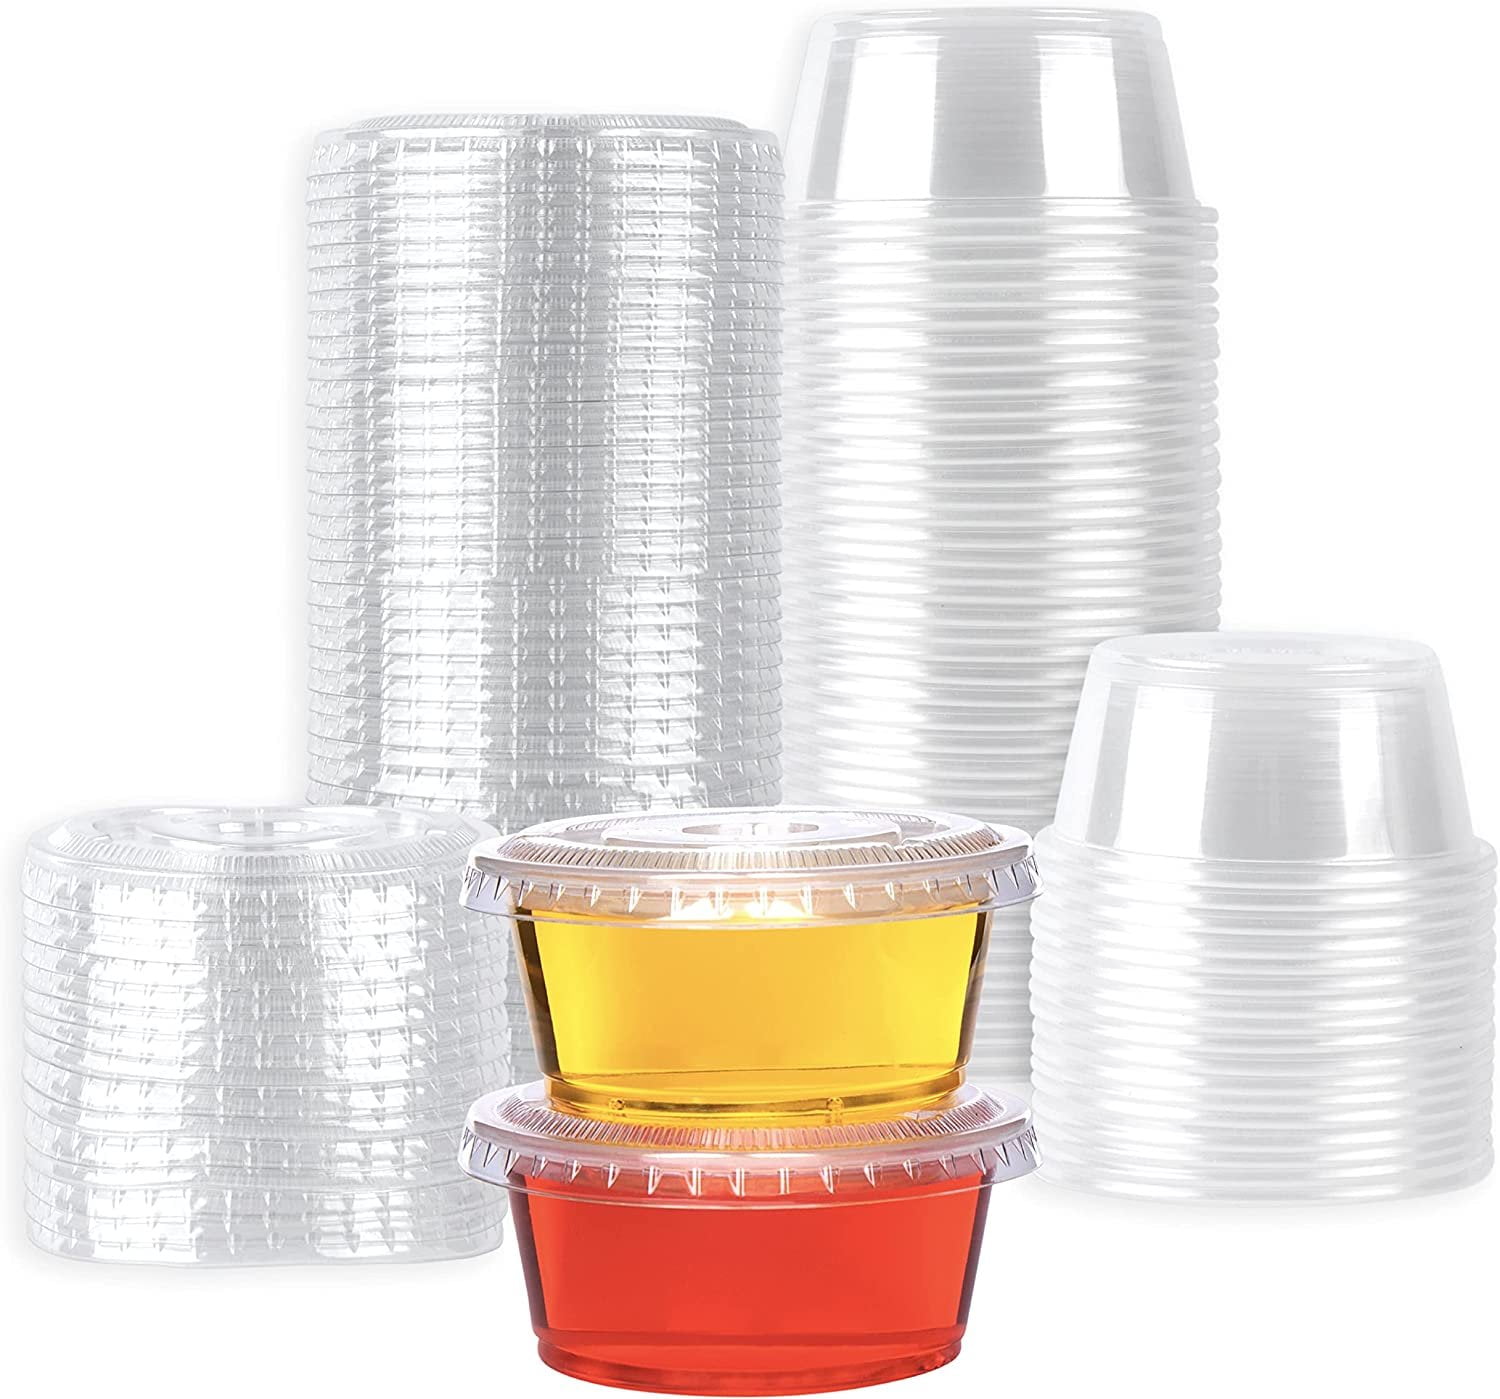 Galashield [100 Sets] 3.25 oz Small Plastic Containers with Lids